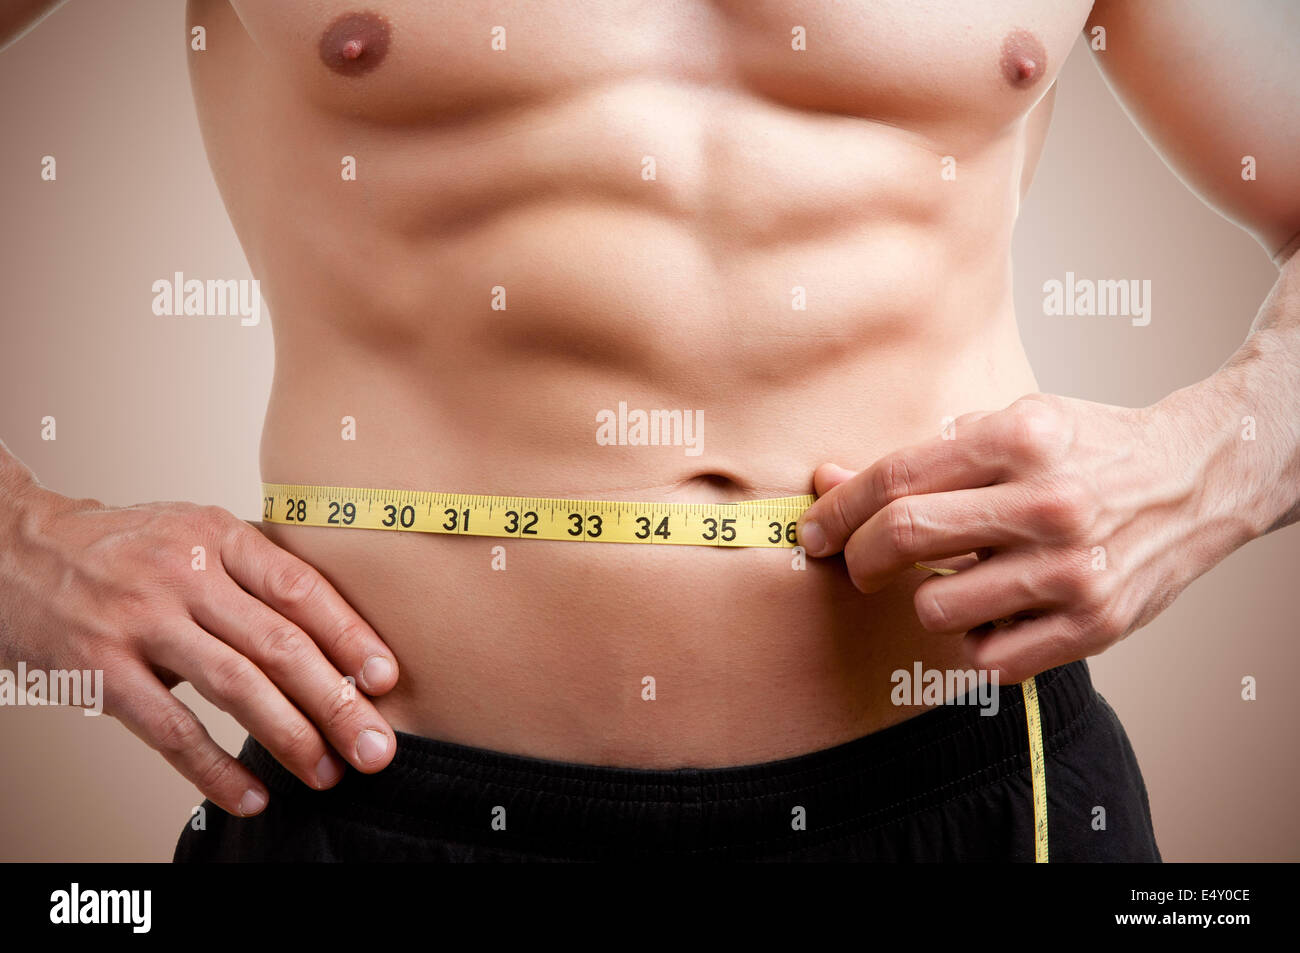 Fit Man Measuring His Waist Stock Photo